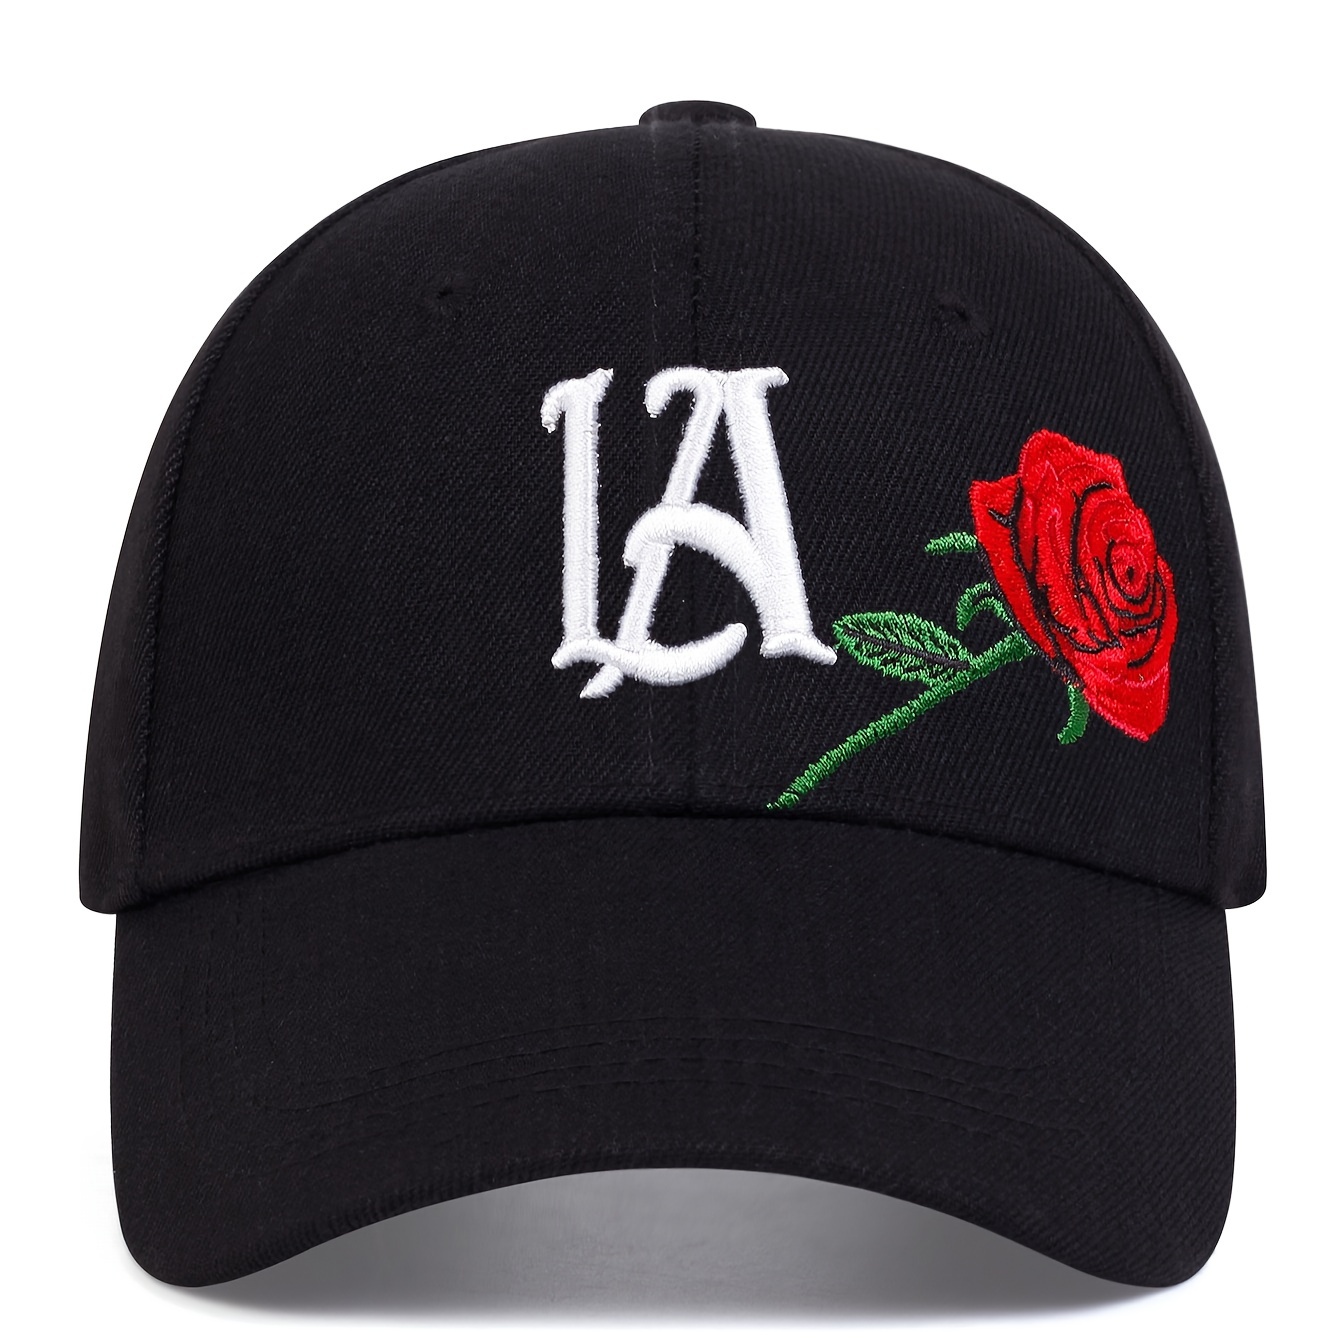 Top All Season Outdoor Designer Baseball Cap Hats For Men Woman Fitted Hats  Luxe Jumbo Fraise Tiger Bee Letter Sunshade Sport Embroidery Beach Travel  Hats Adjustable From Luxurybagfactory668, $11.79